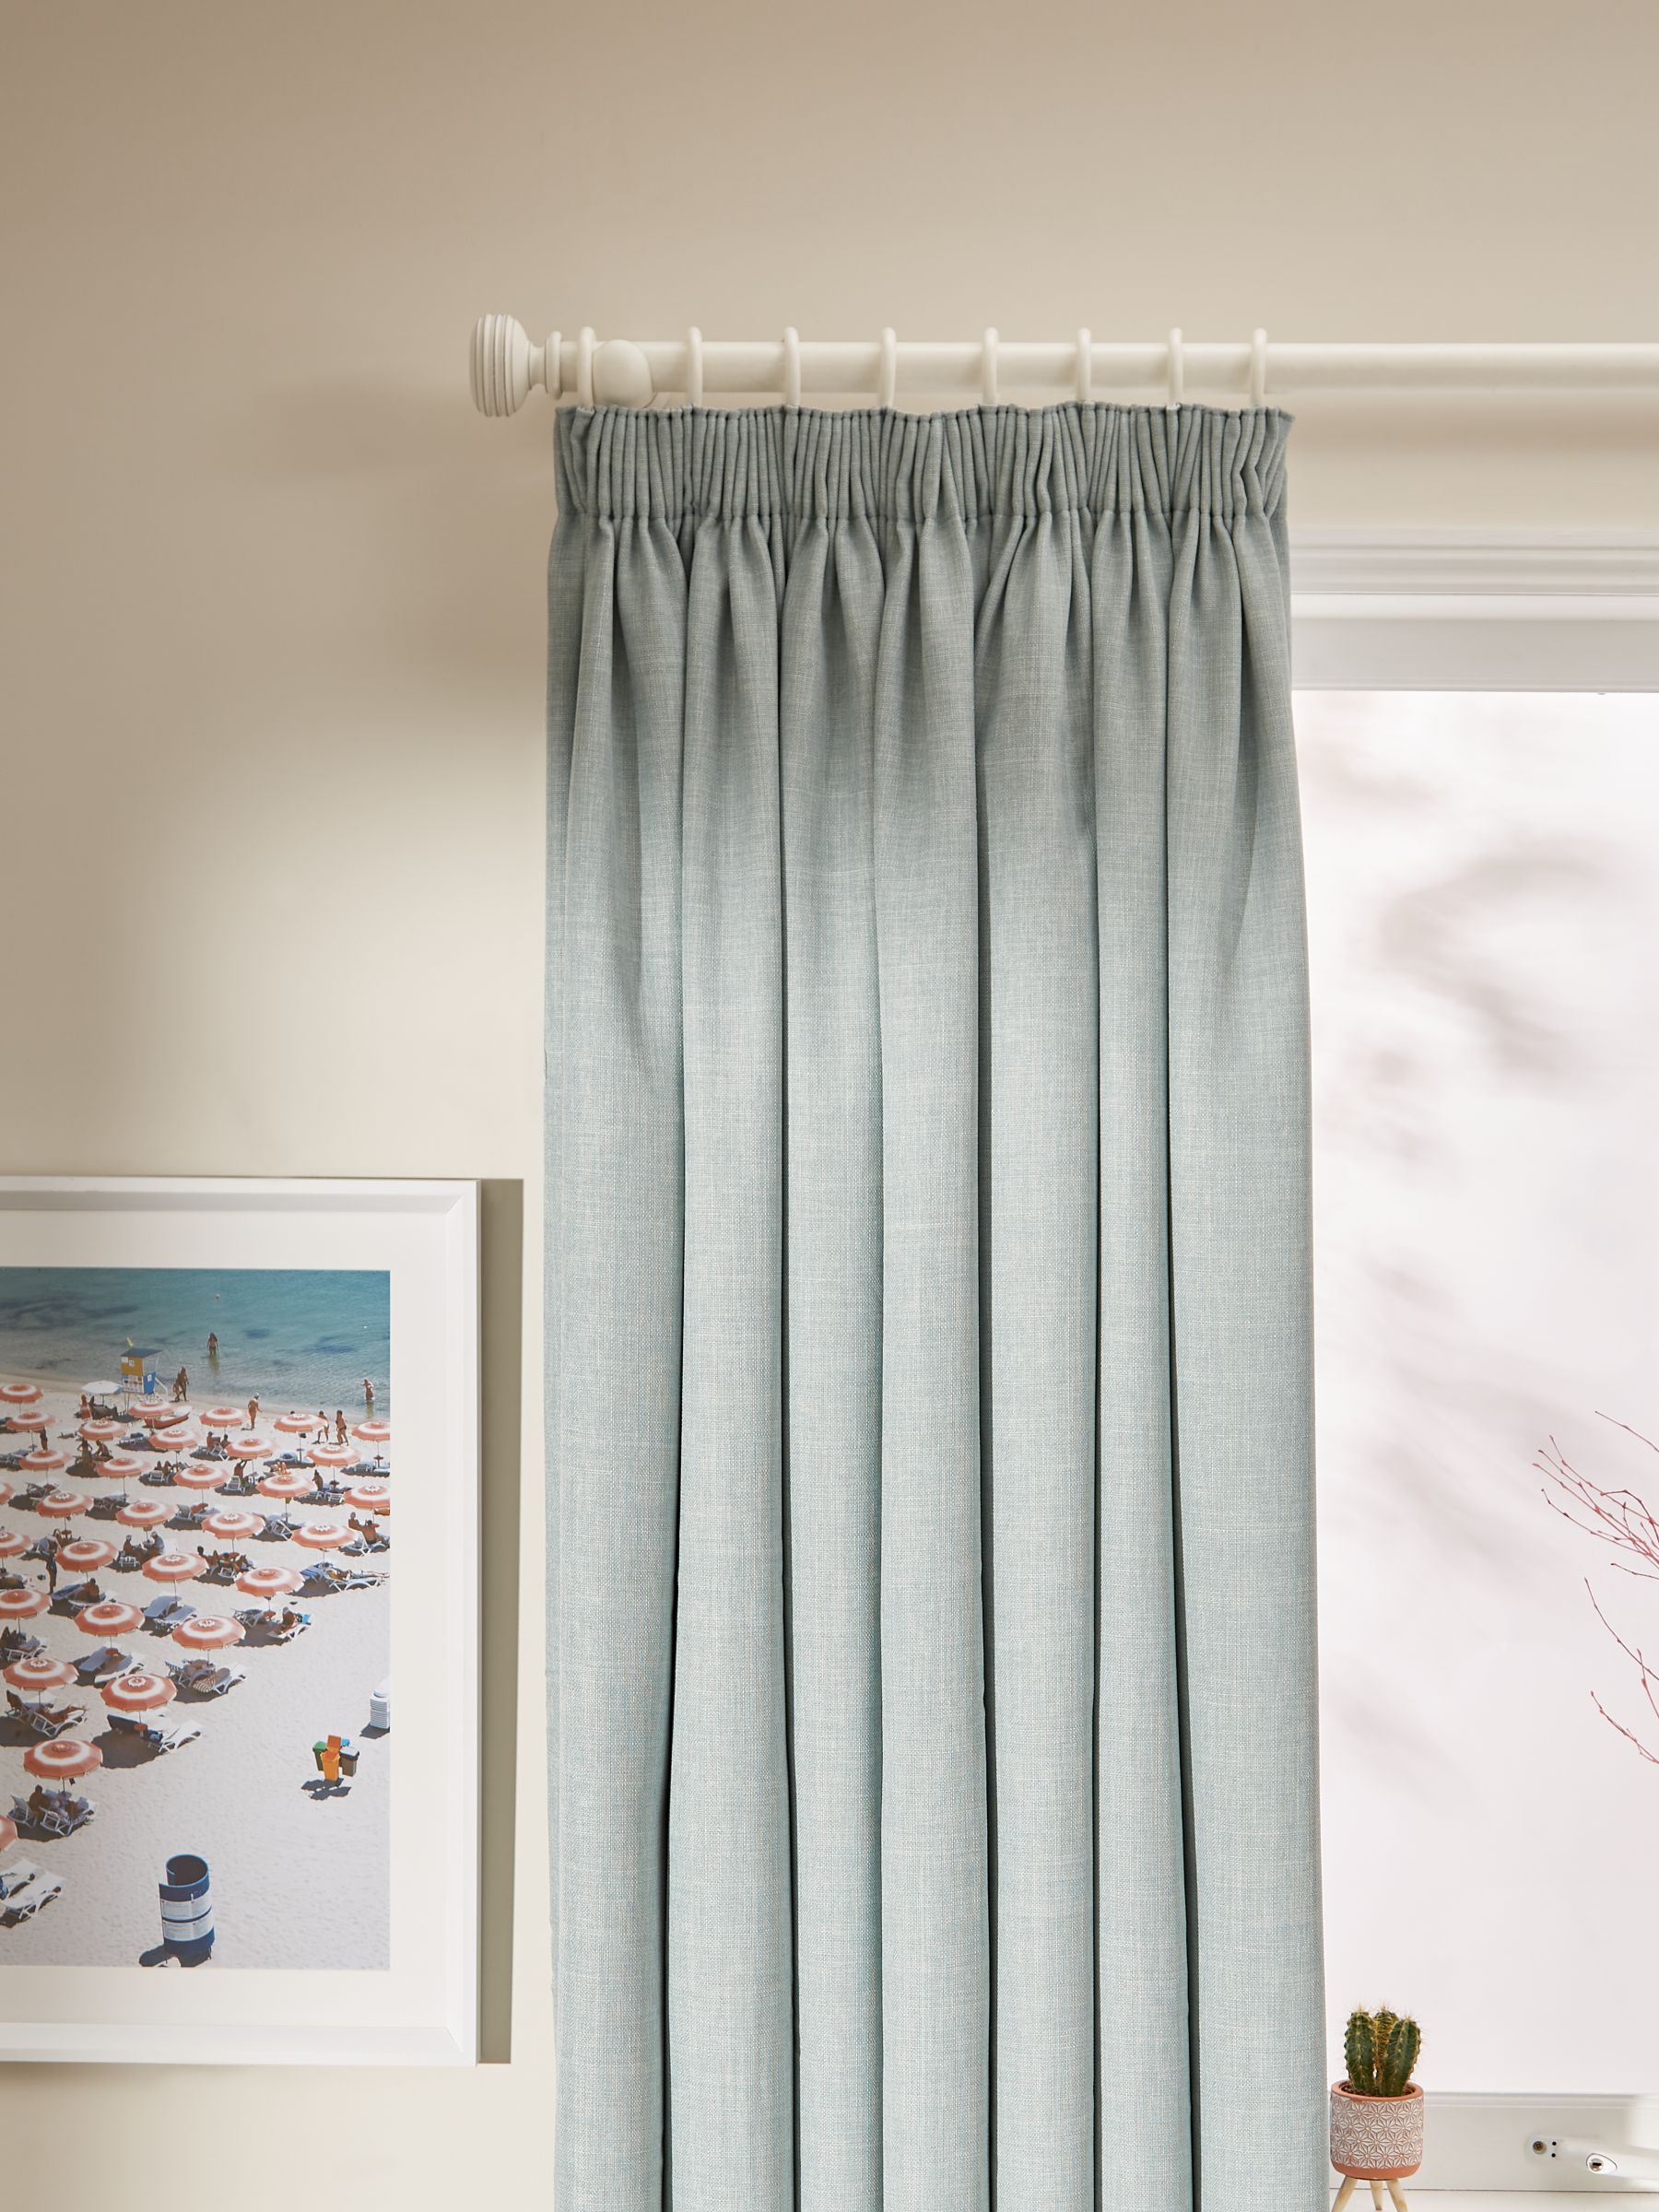 Dreamscene Pair of Textured Eyelet OR Pencil Pleat Thermal Curtains Ready Made 